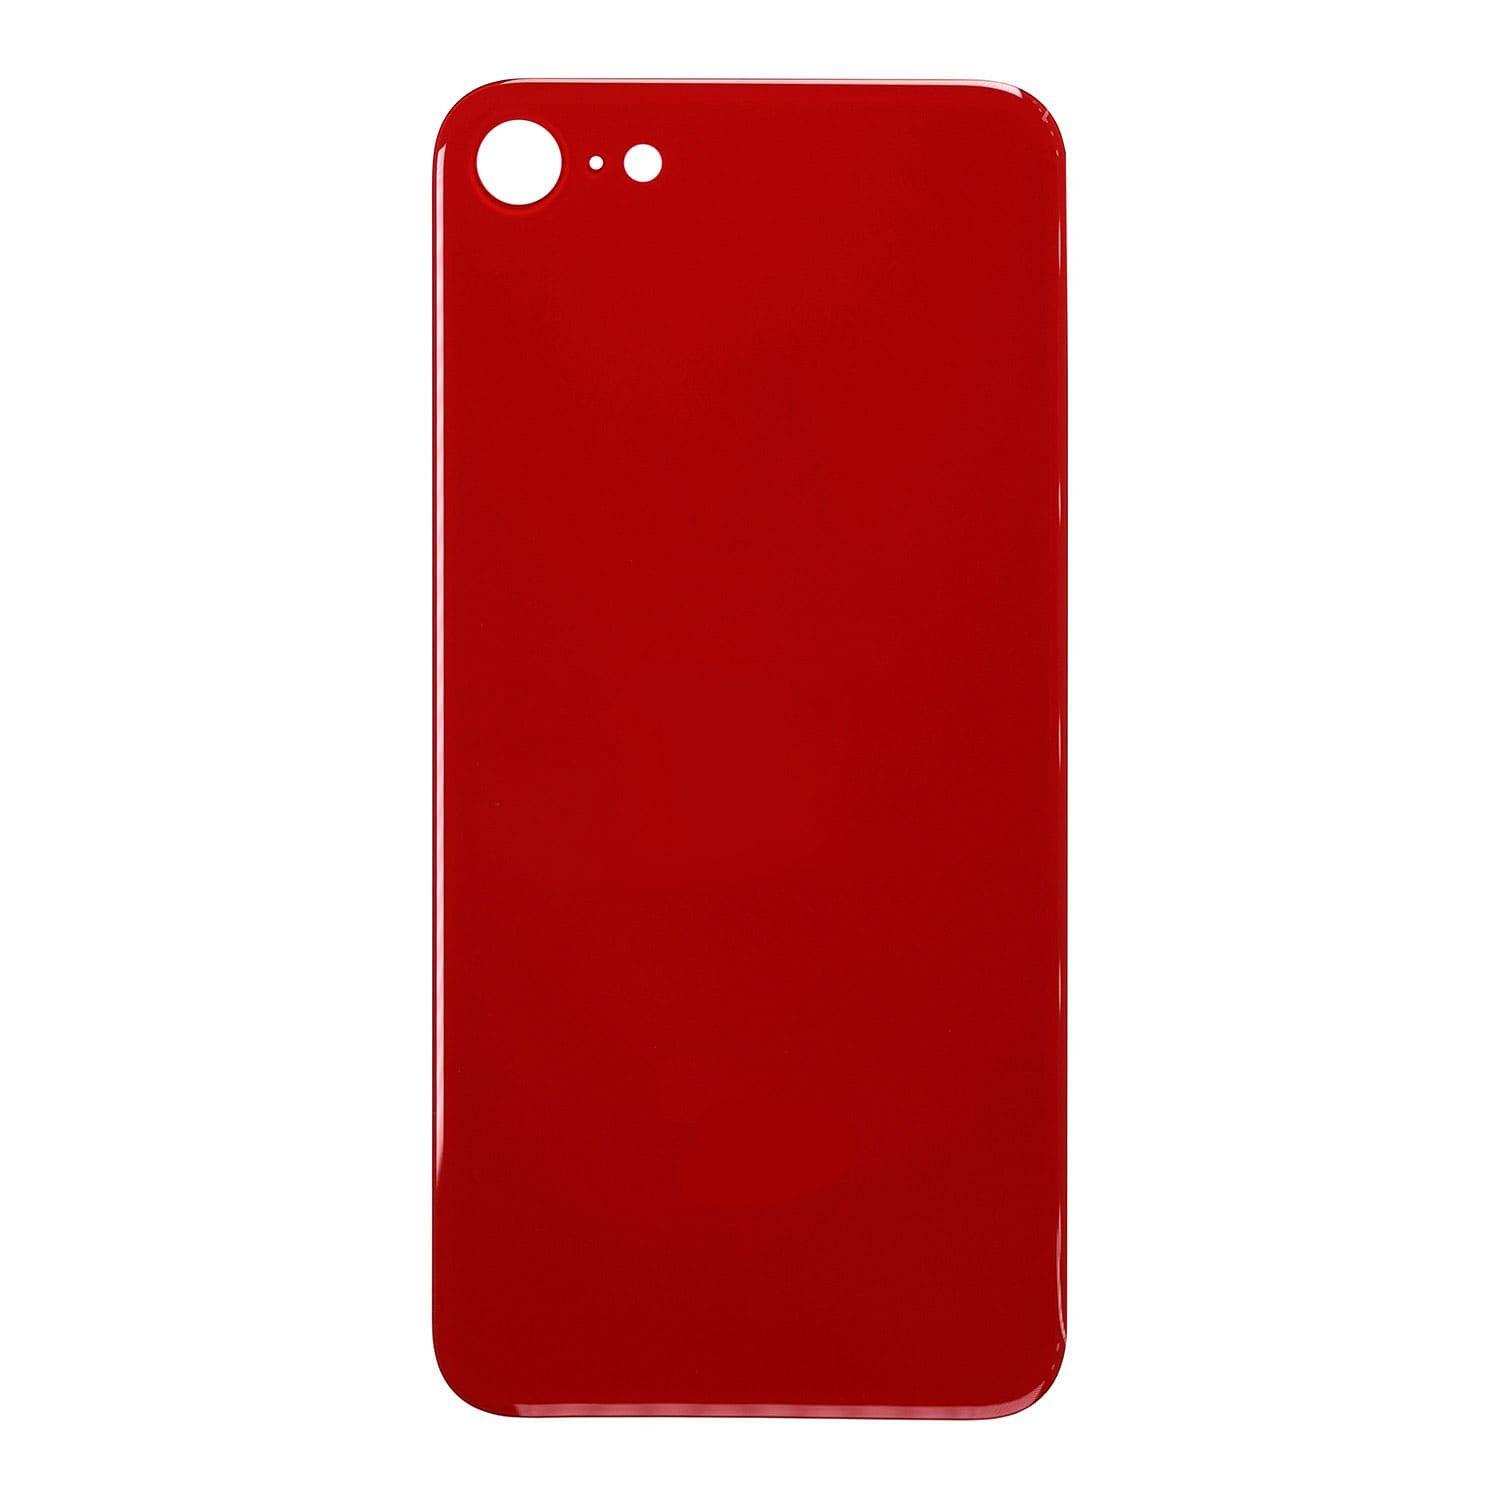 Battery cover iPhone SE 2020 with bigger hole for camera glass - red